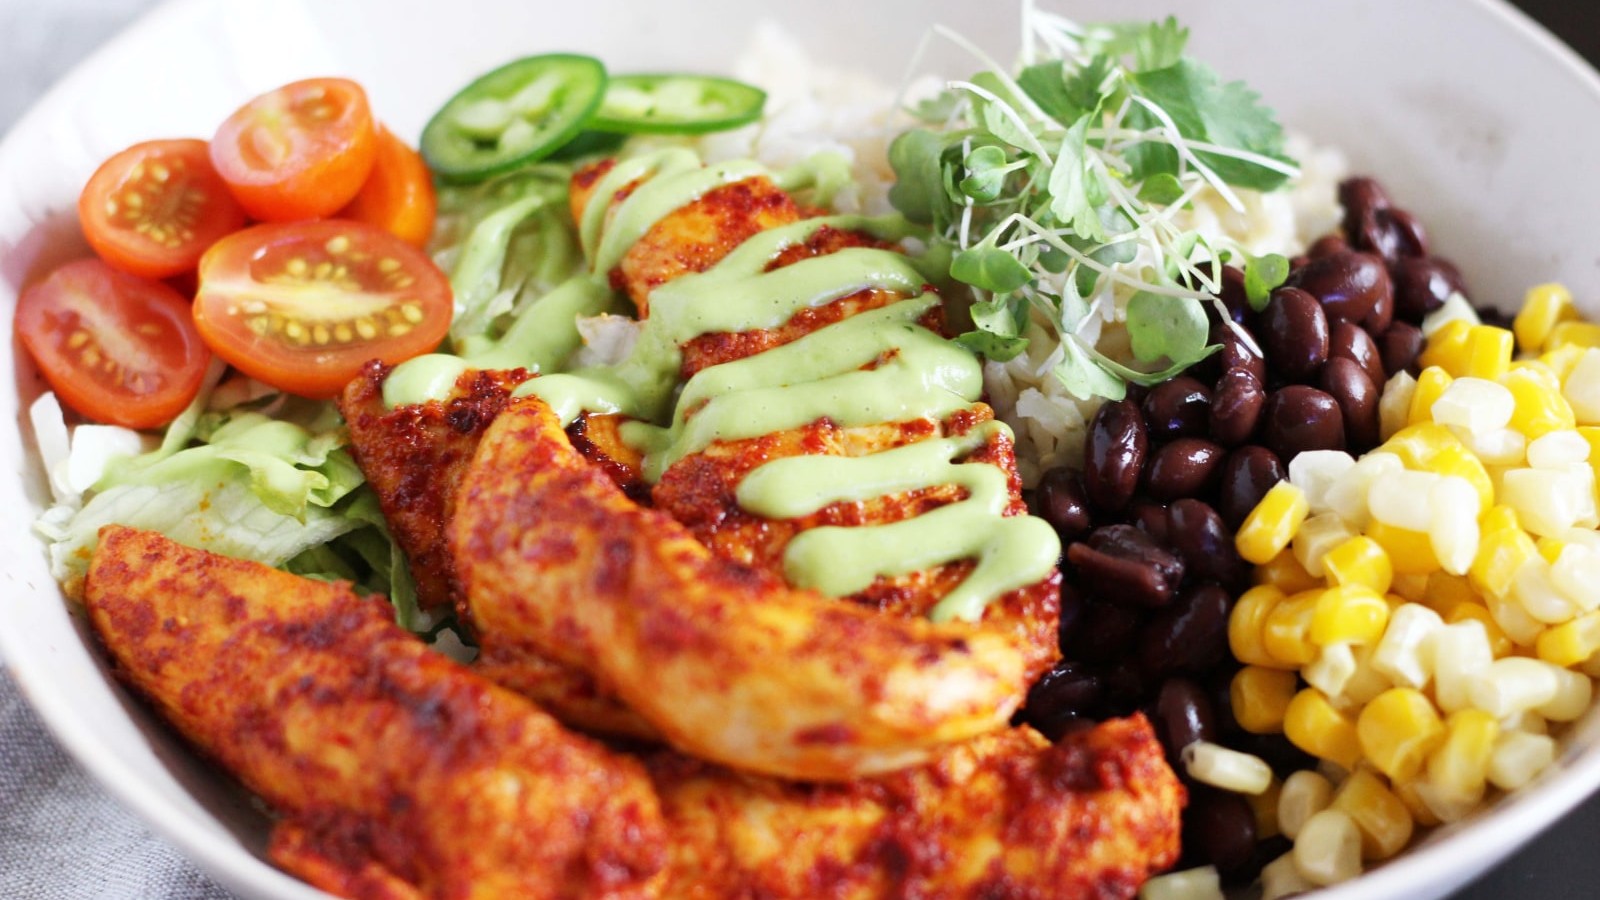 Image of Chipotle Chicken with Avocado Cream Sauce